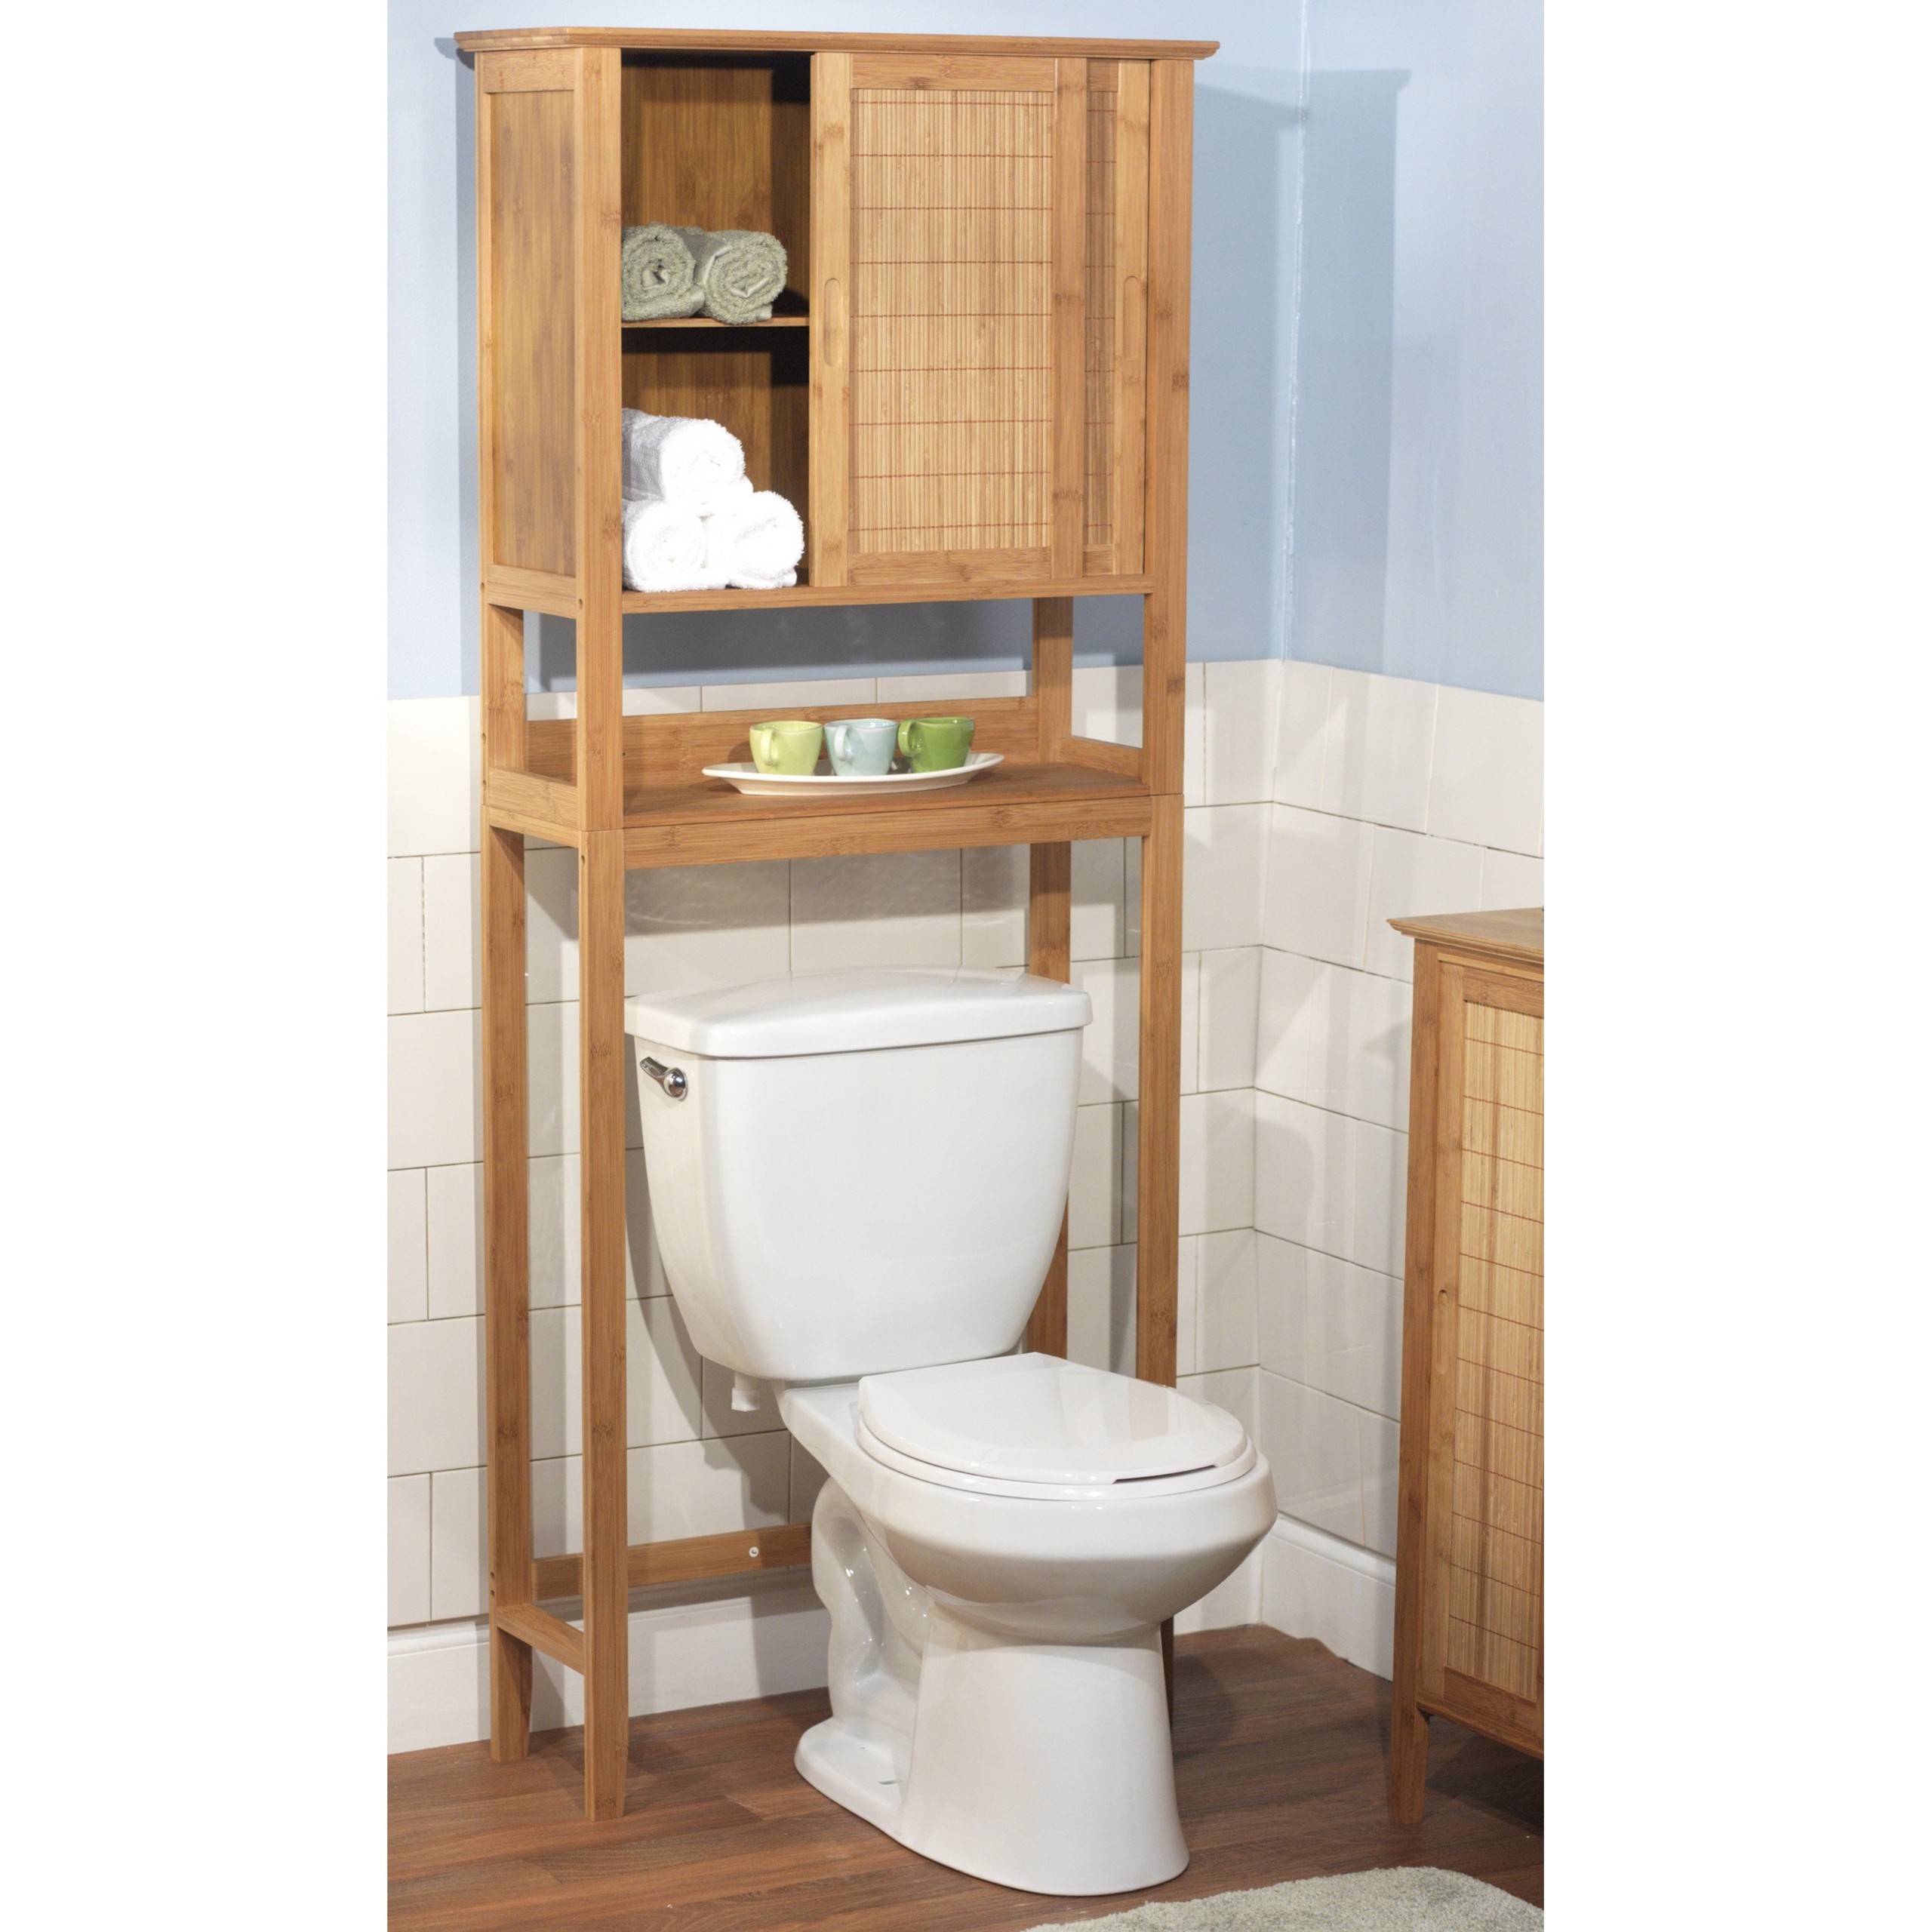 Natural Bamboo Space Saver Bathroom Storage Space - Towel Shelf Over Toilet